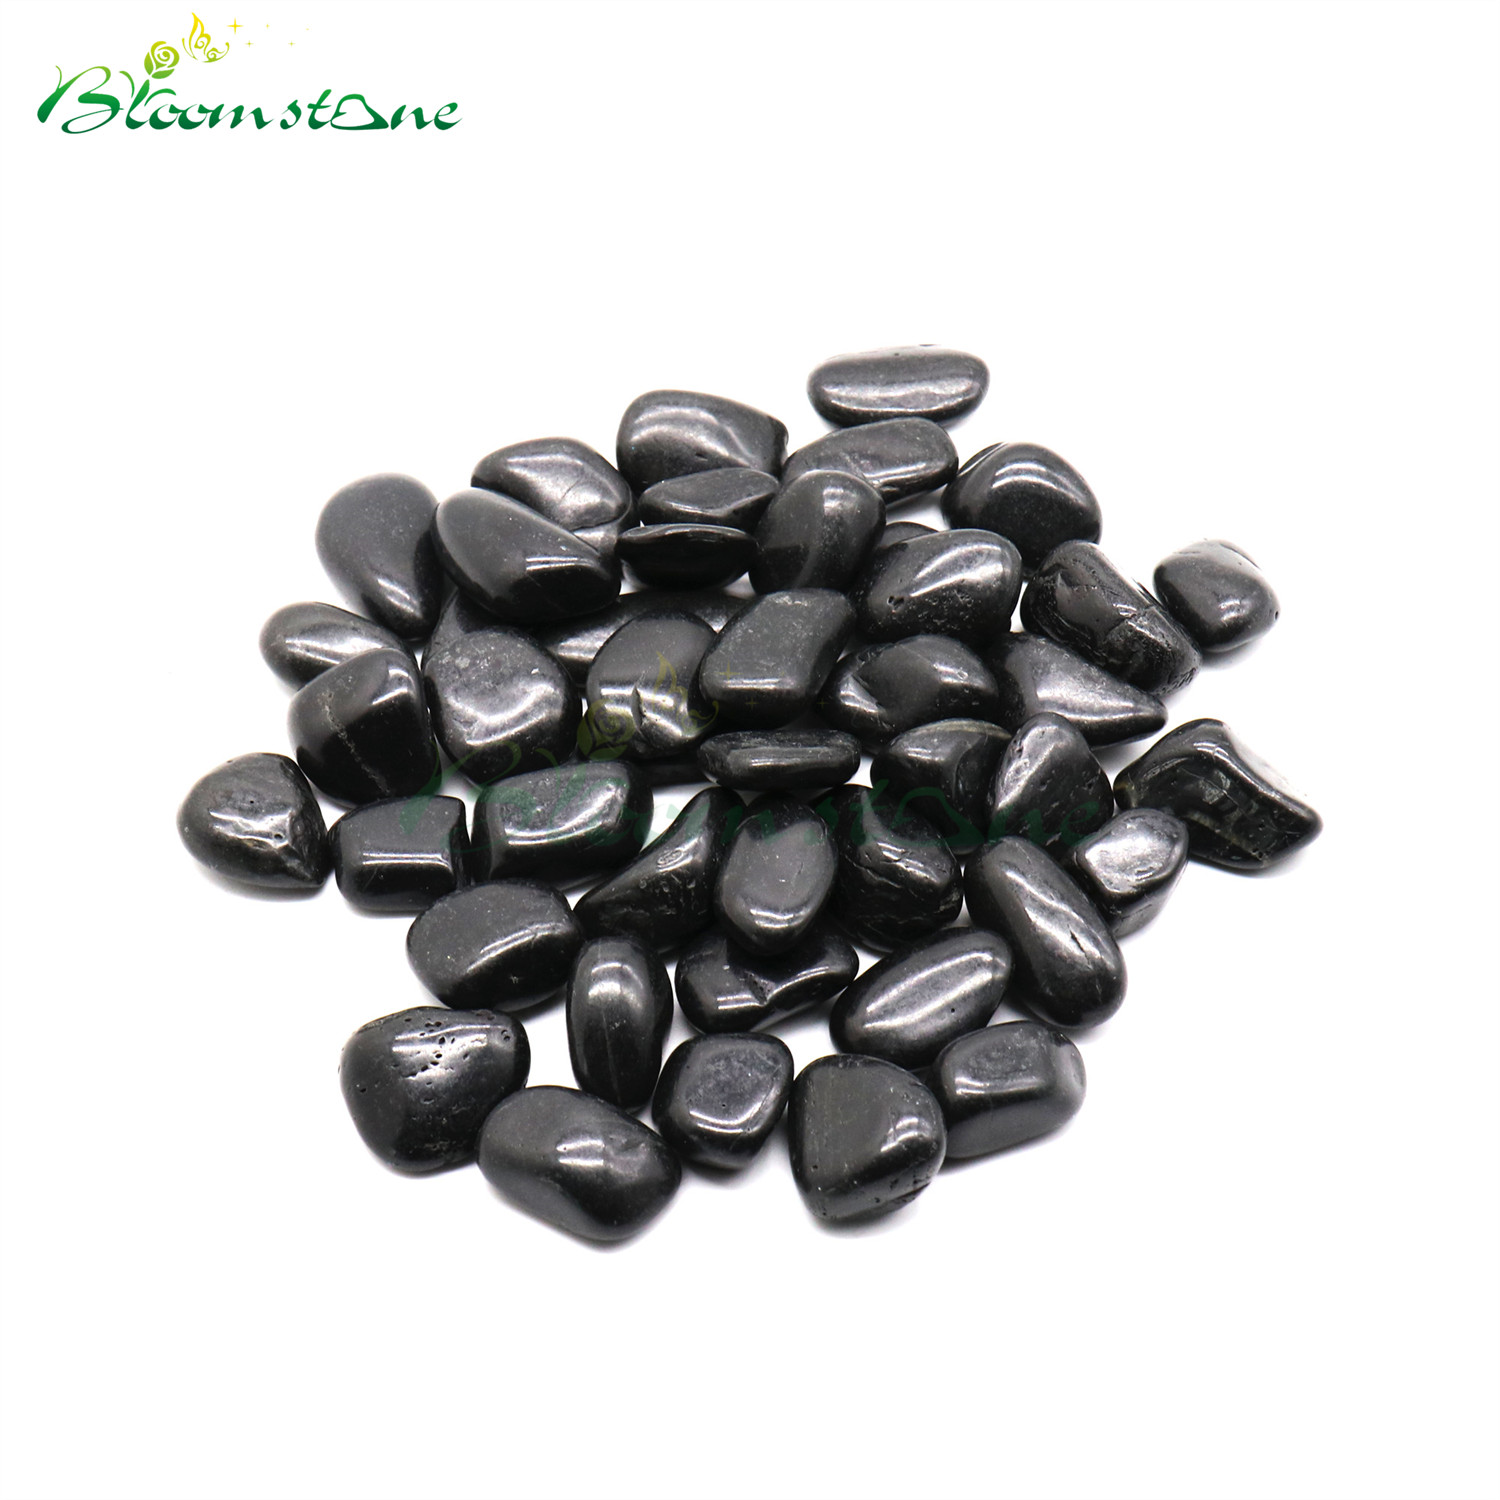 High polished black pebble stone for Landscaping and garden decoration